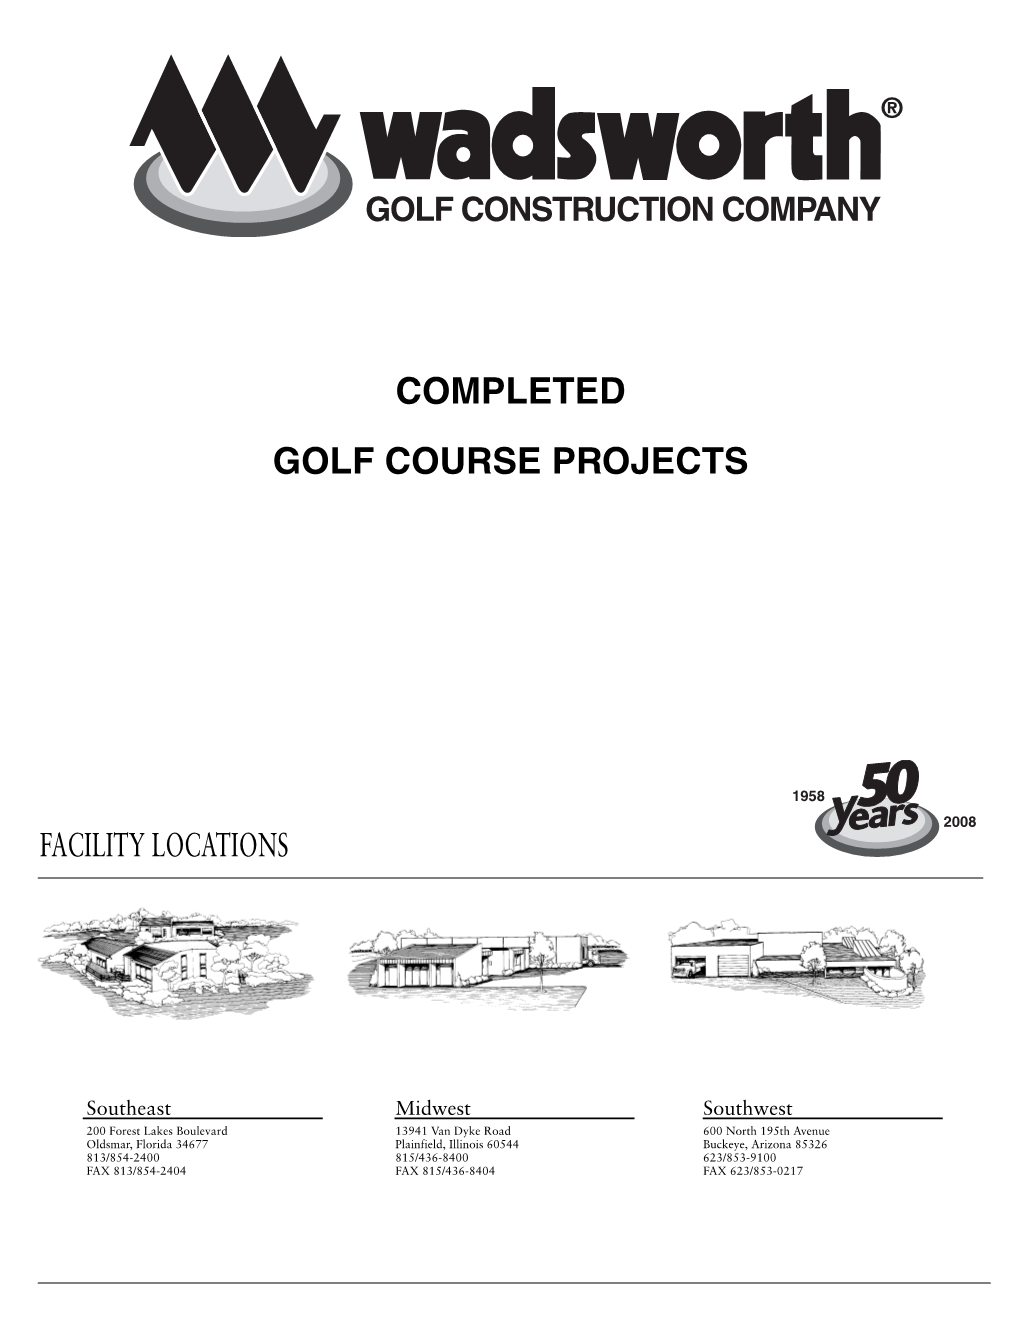 Completed Golf Course Projects